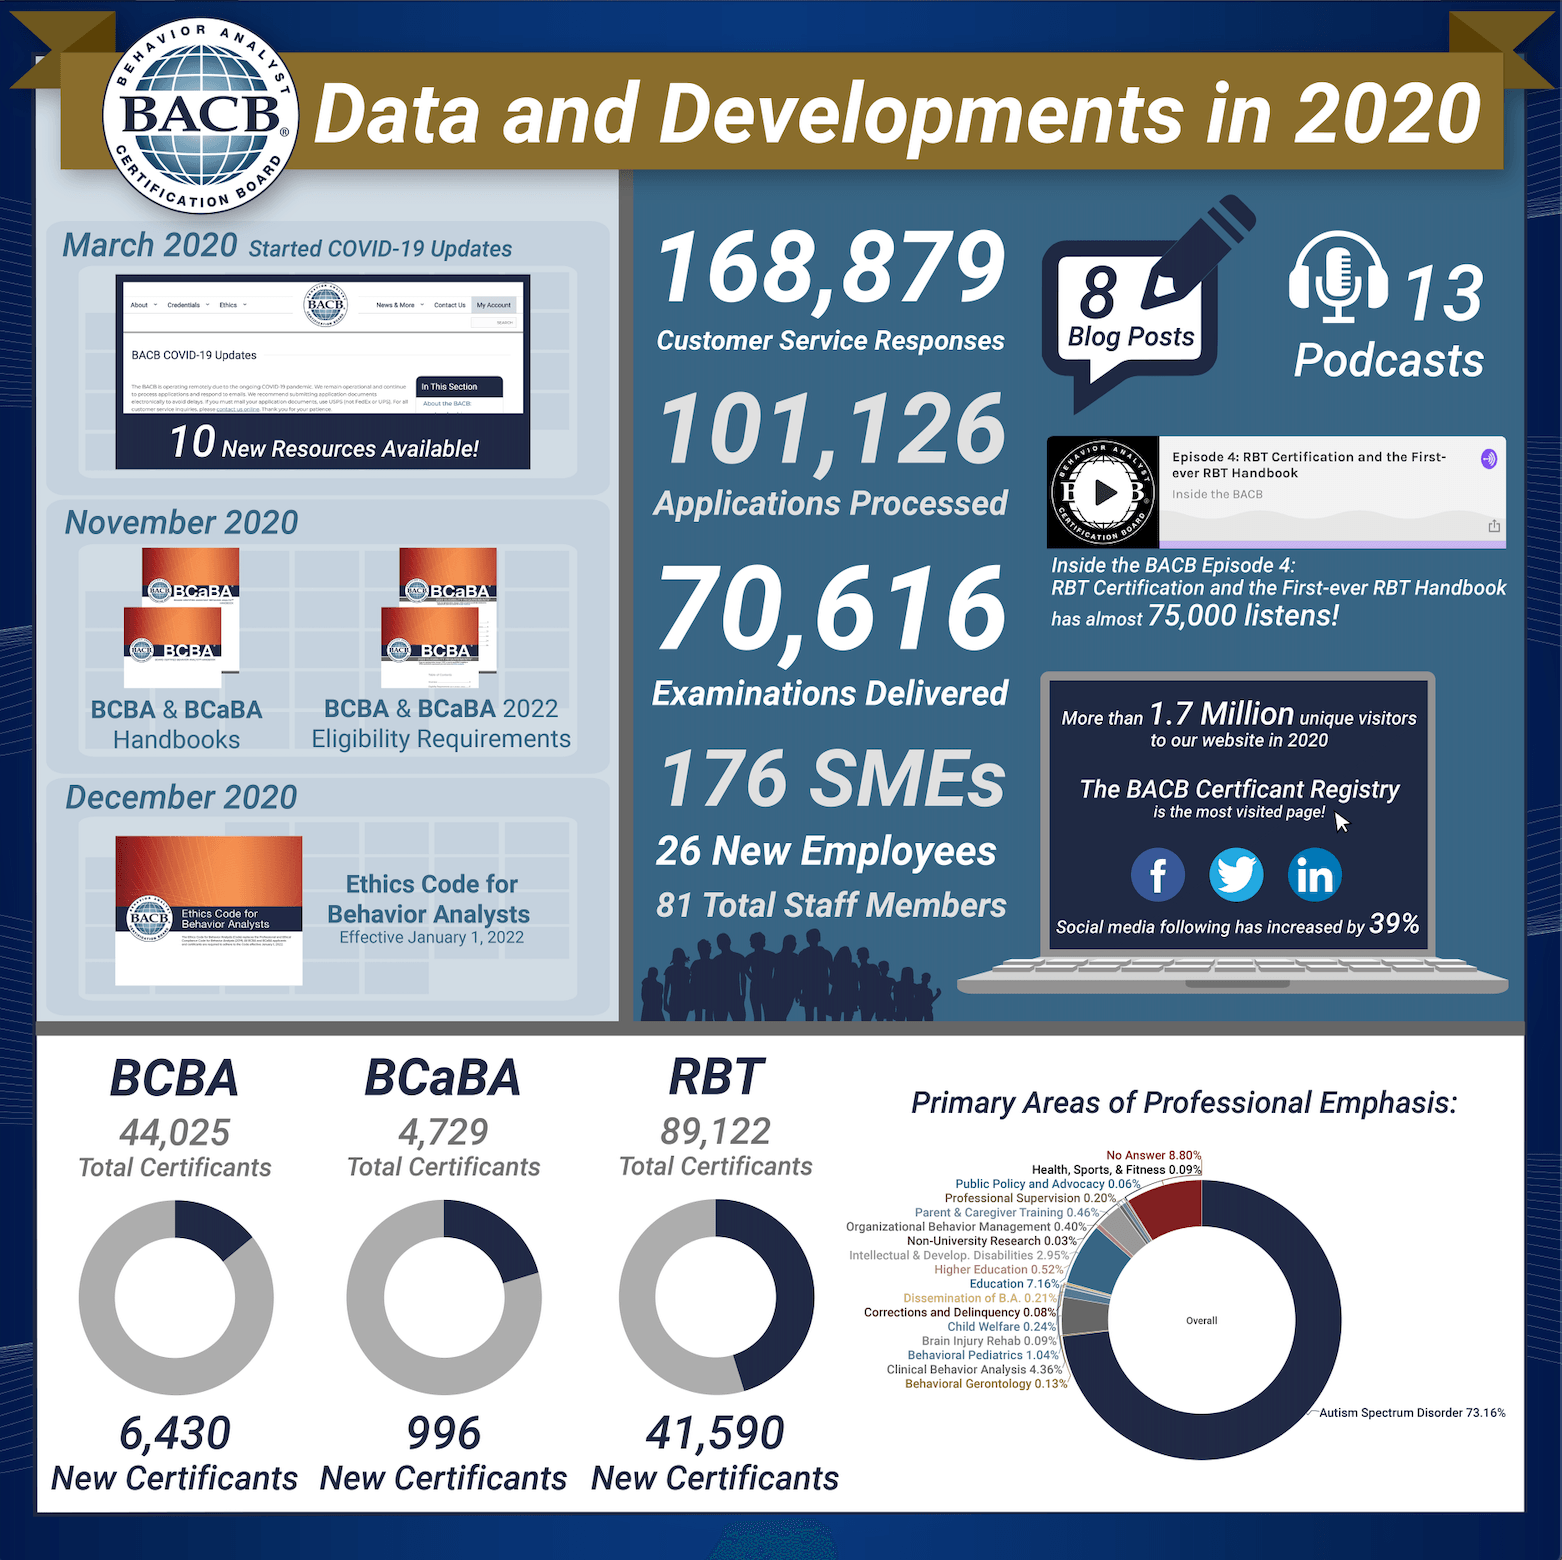 BACB Data and Developments in 2020 infographic